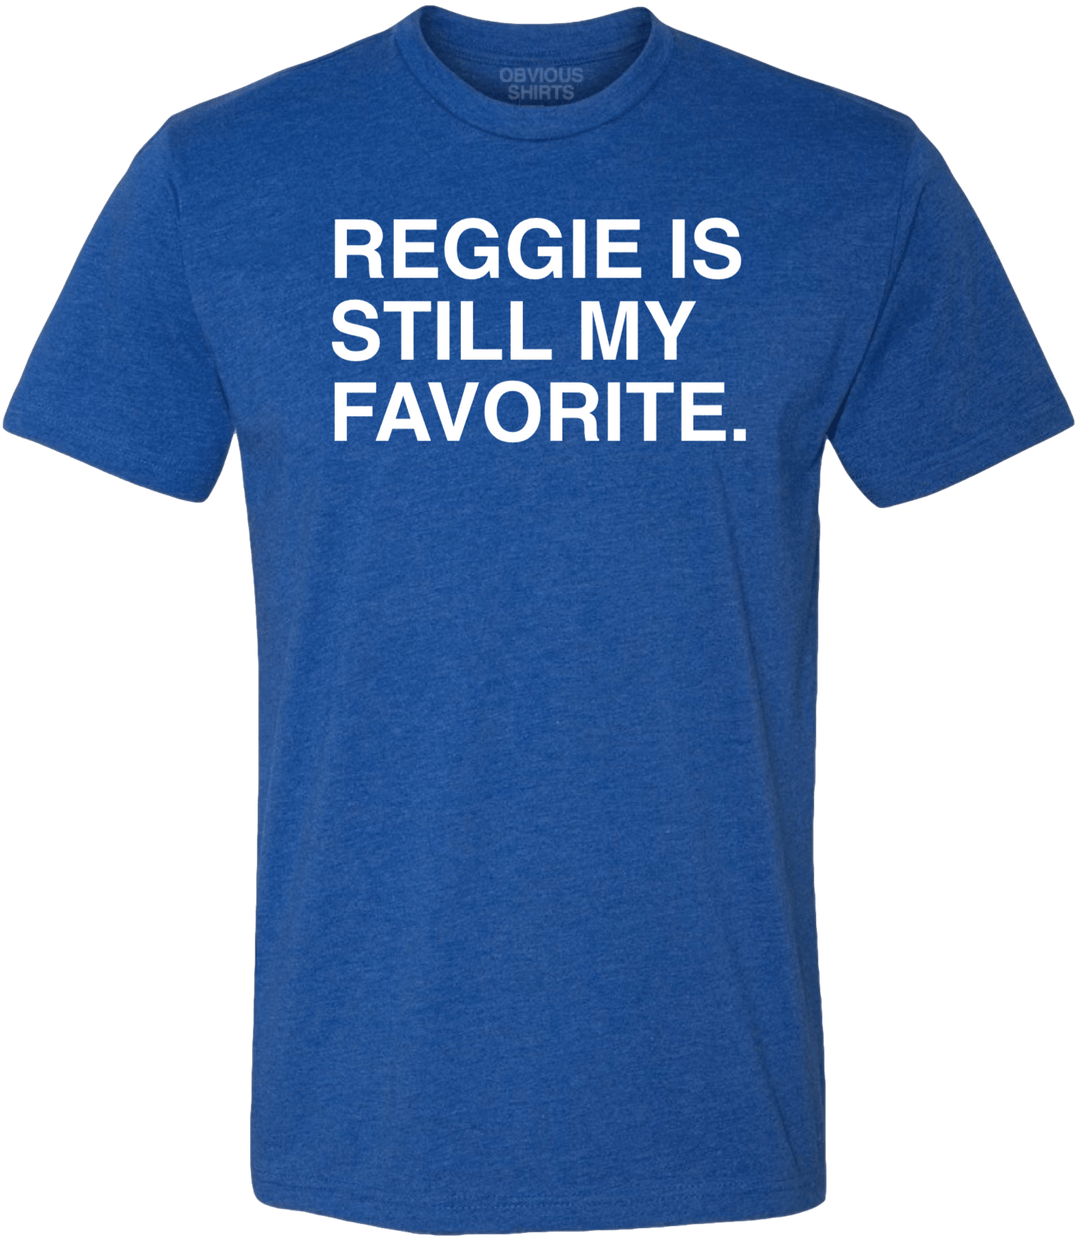 REGGIE IS STILL MY FAVORITE. (BLUE) - OBVIOUS SHIRTS